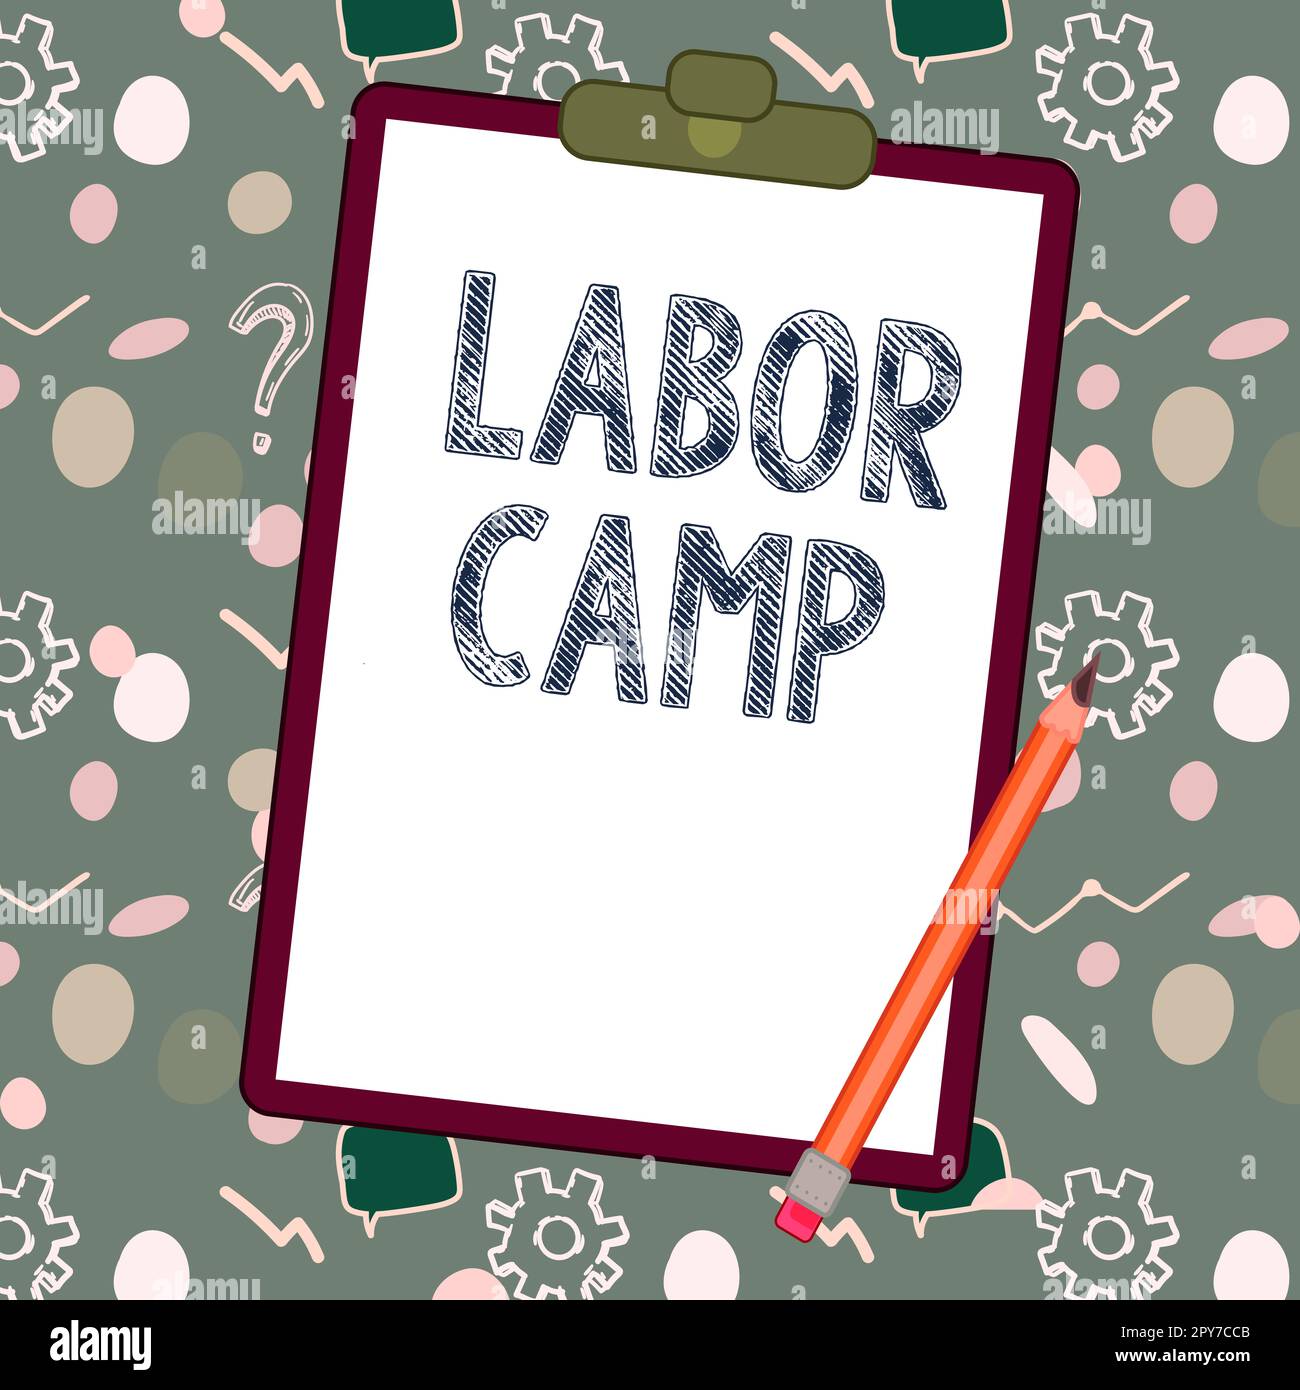 Handwriting text Labor Camp. Business approach a penal colony where forced labor is performed Stock Photo